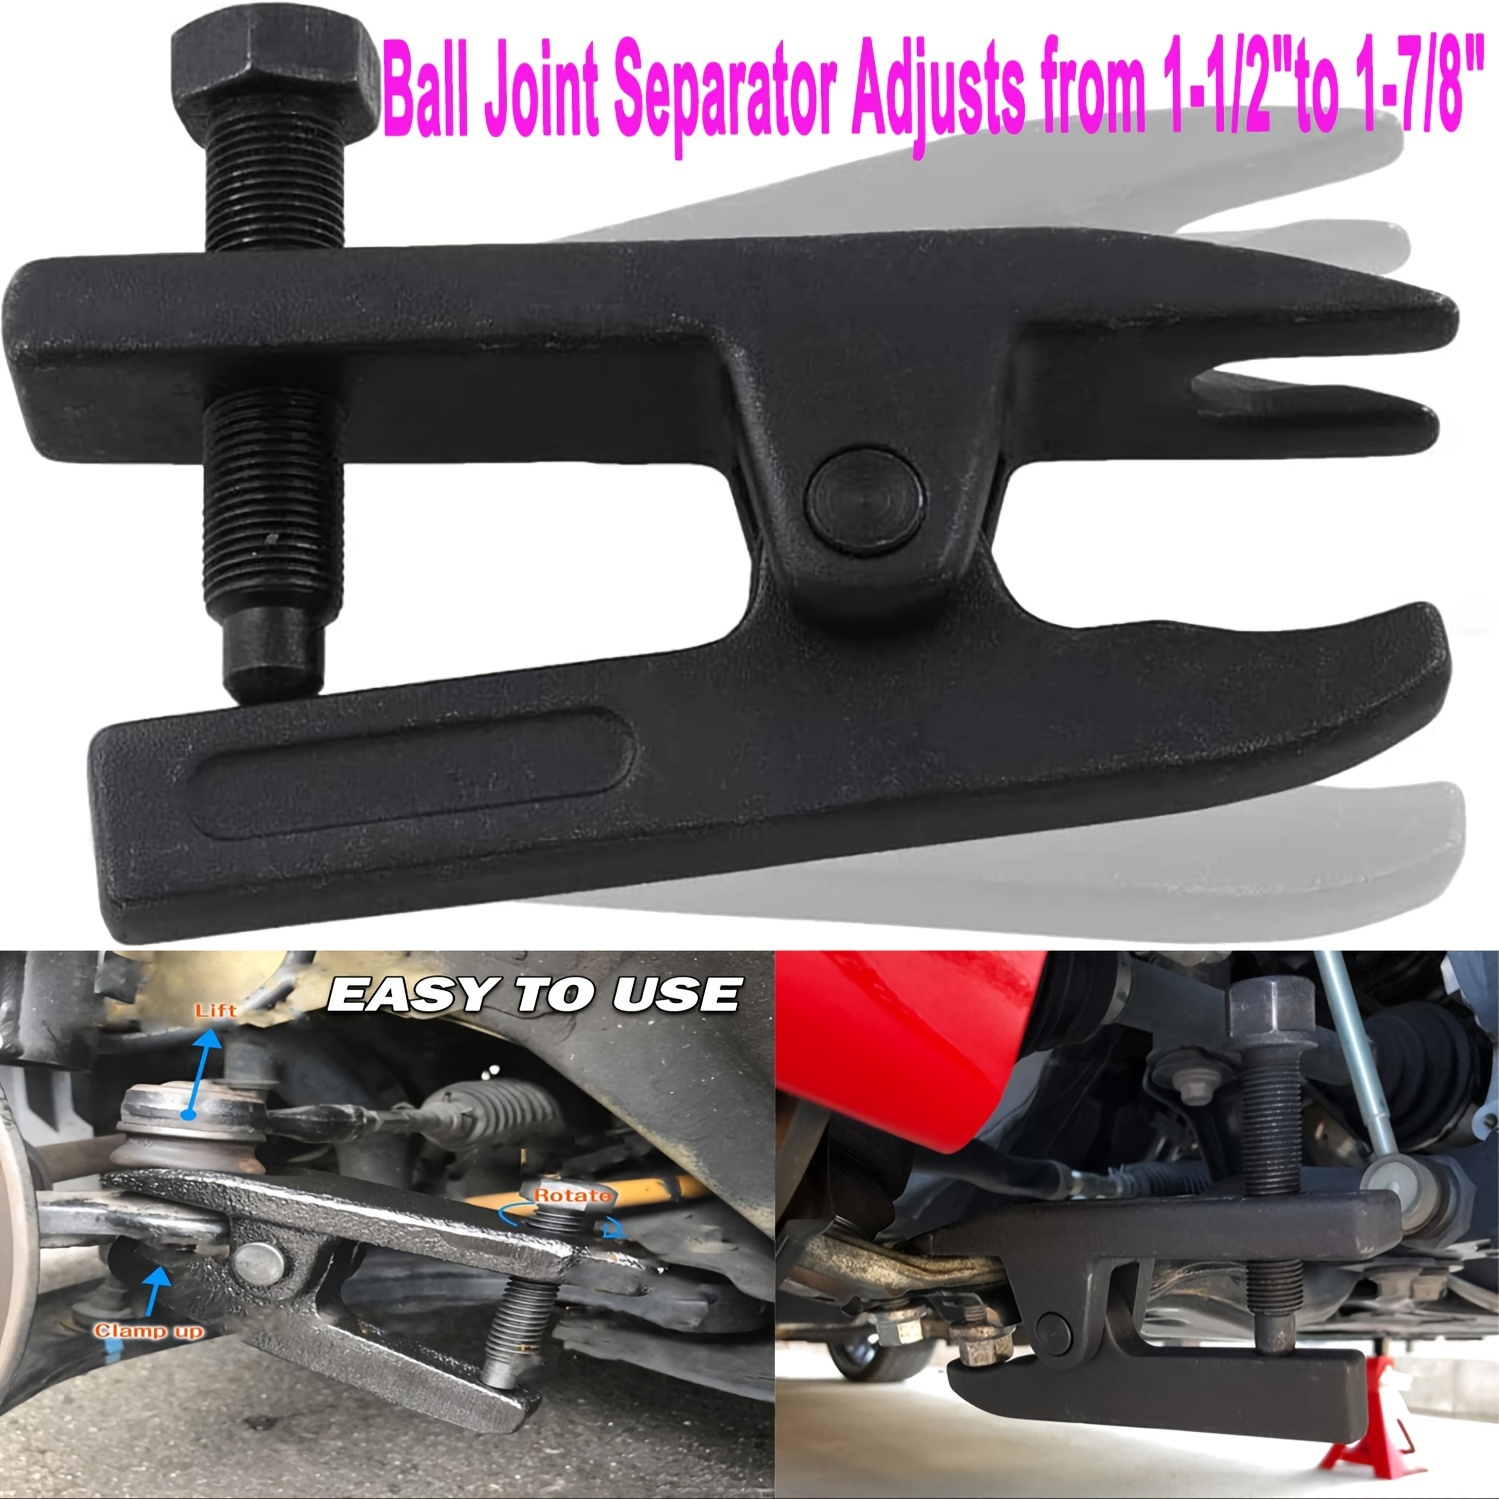 

5-in-1 Ball Joint & Tie Rod End - Adjusts From 1-1/2" To 1-7/8", Durable All-steel Construction, Easy Use For Cars, Trucks, Atvs